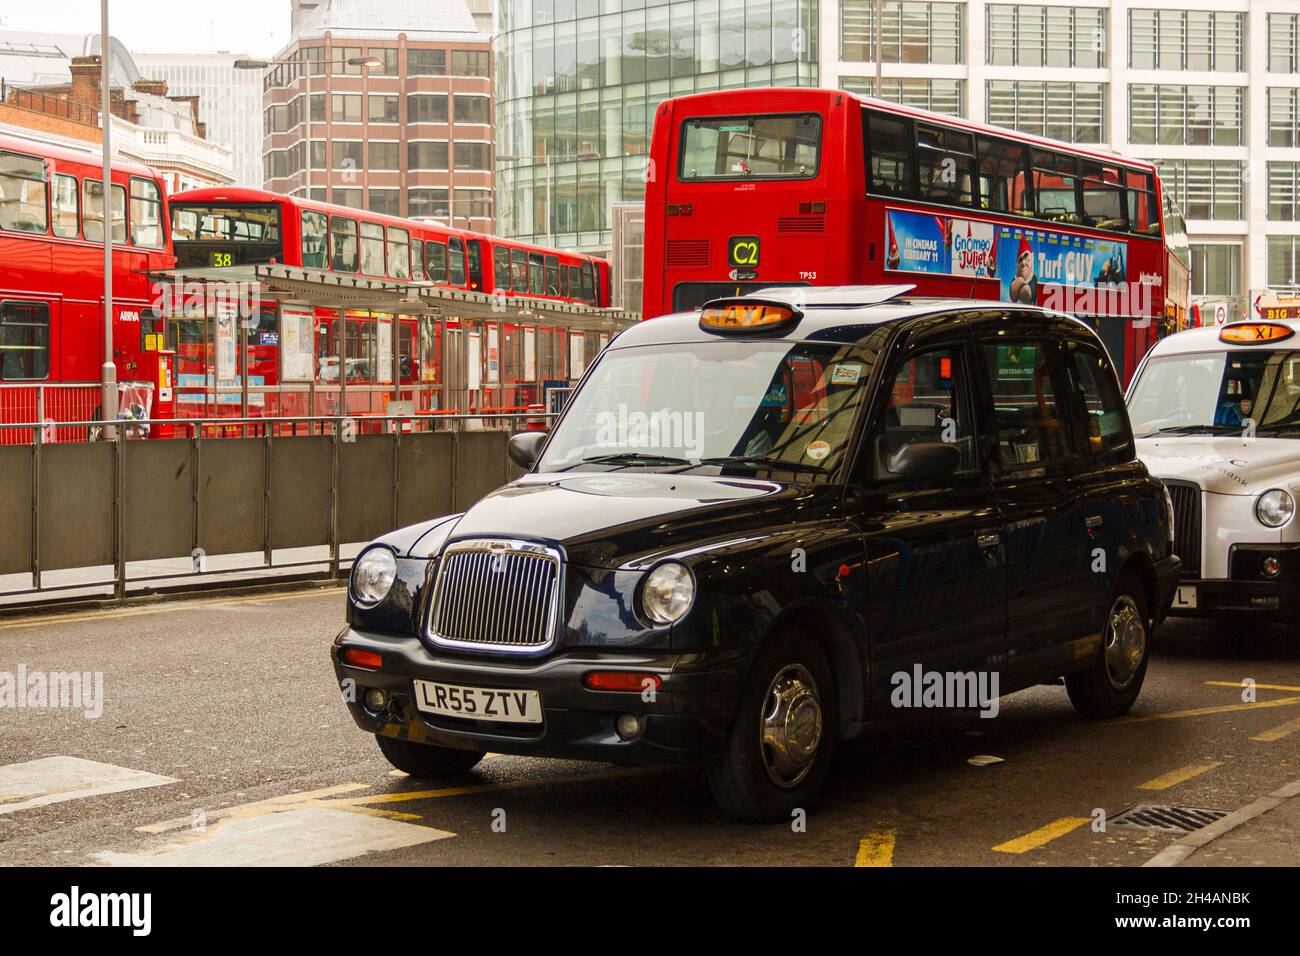 London, United Kingdom; March 15th 2011: Taxi and city buses at the Victoria railway station stop. Stock Photo